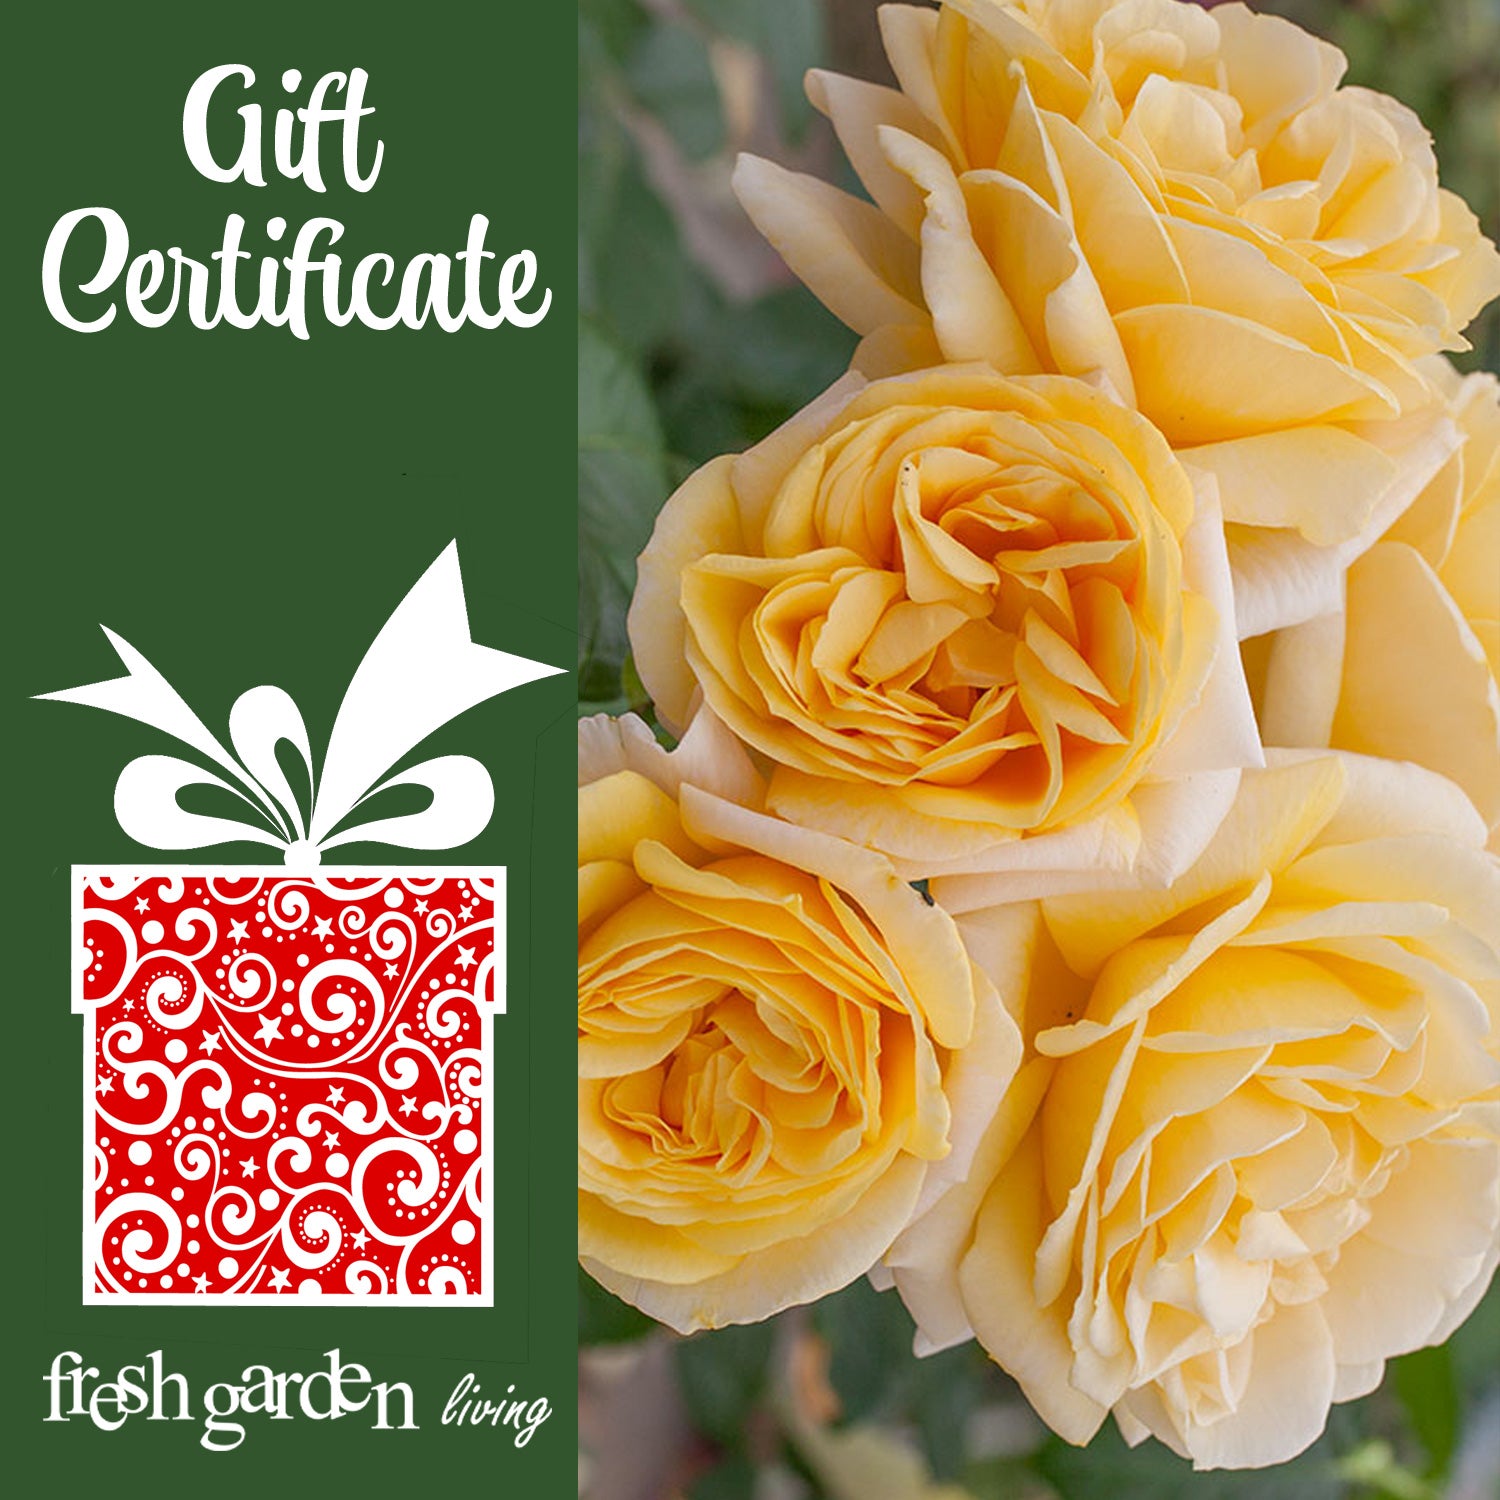 Give a Gift Card from Fresh Garden Living